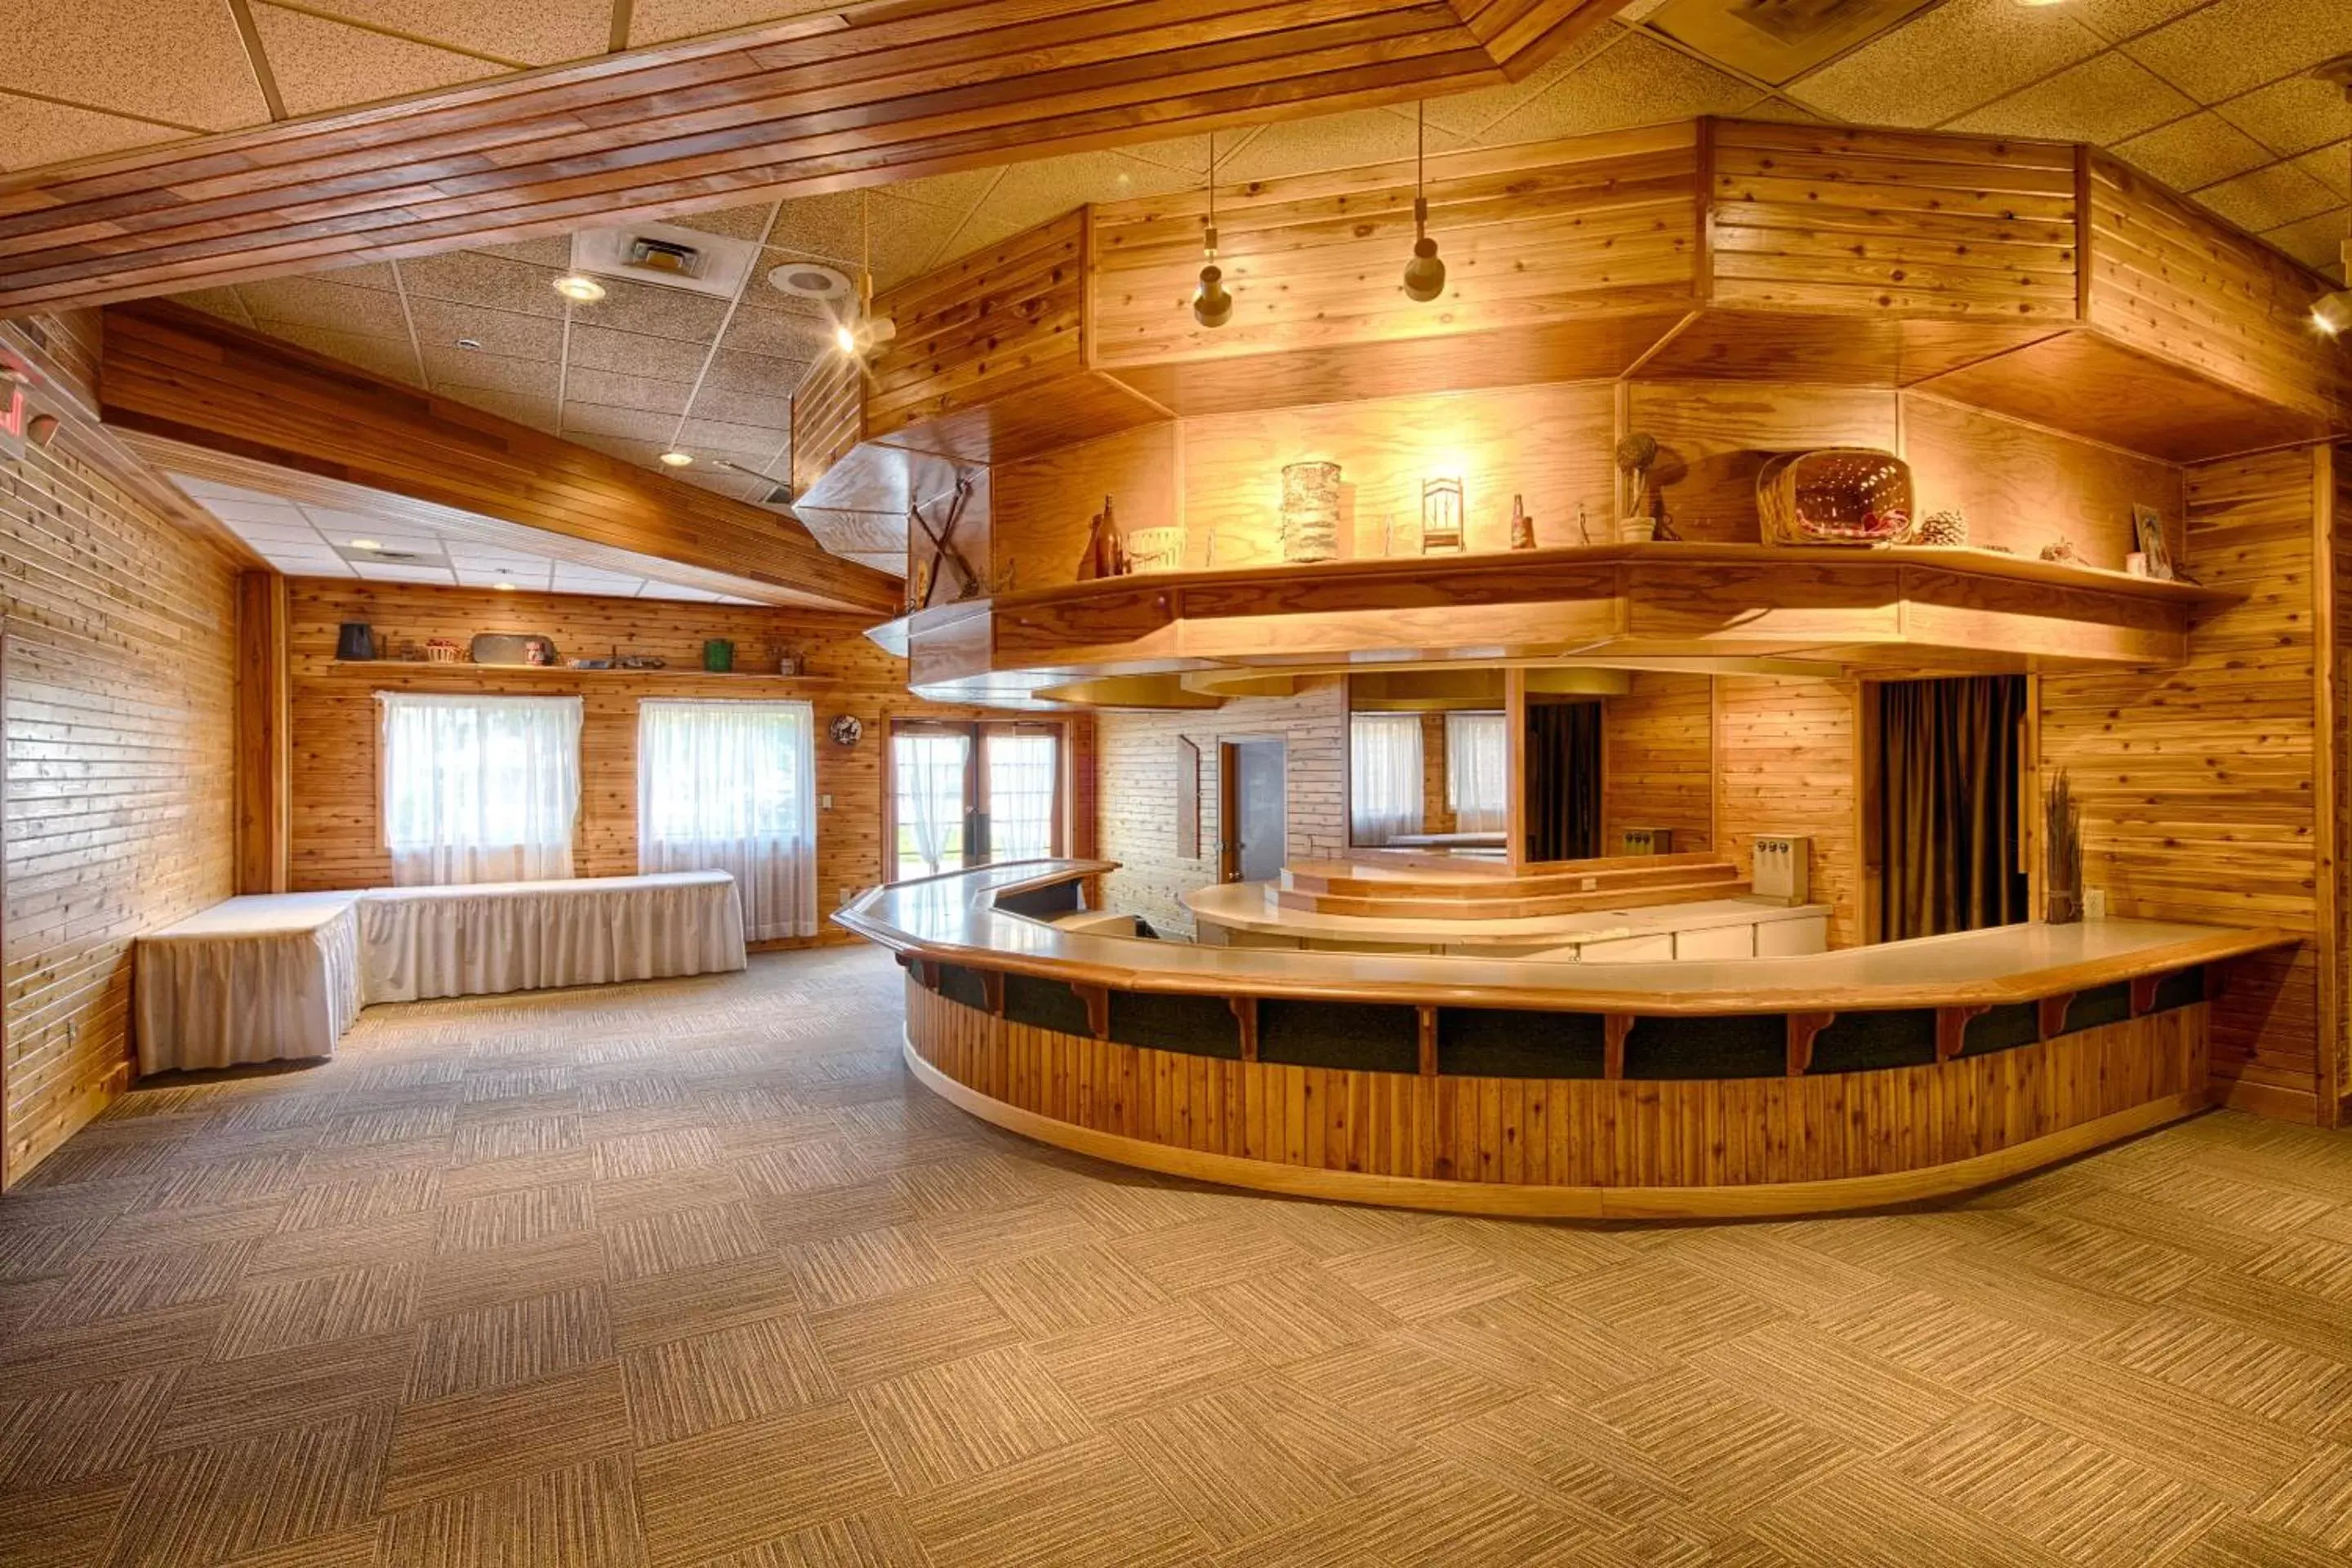 Banquet/Function facilities, Banquet Facilities in Red Lion Hotel Kalispell